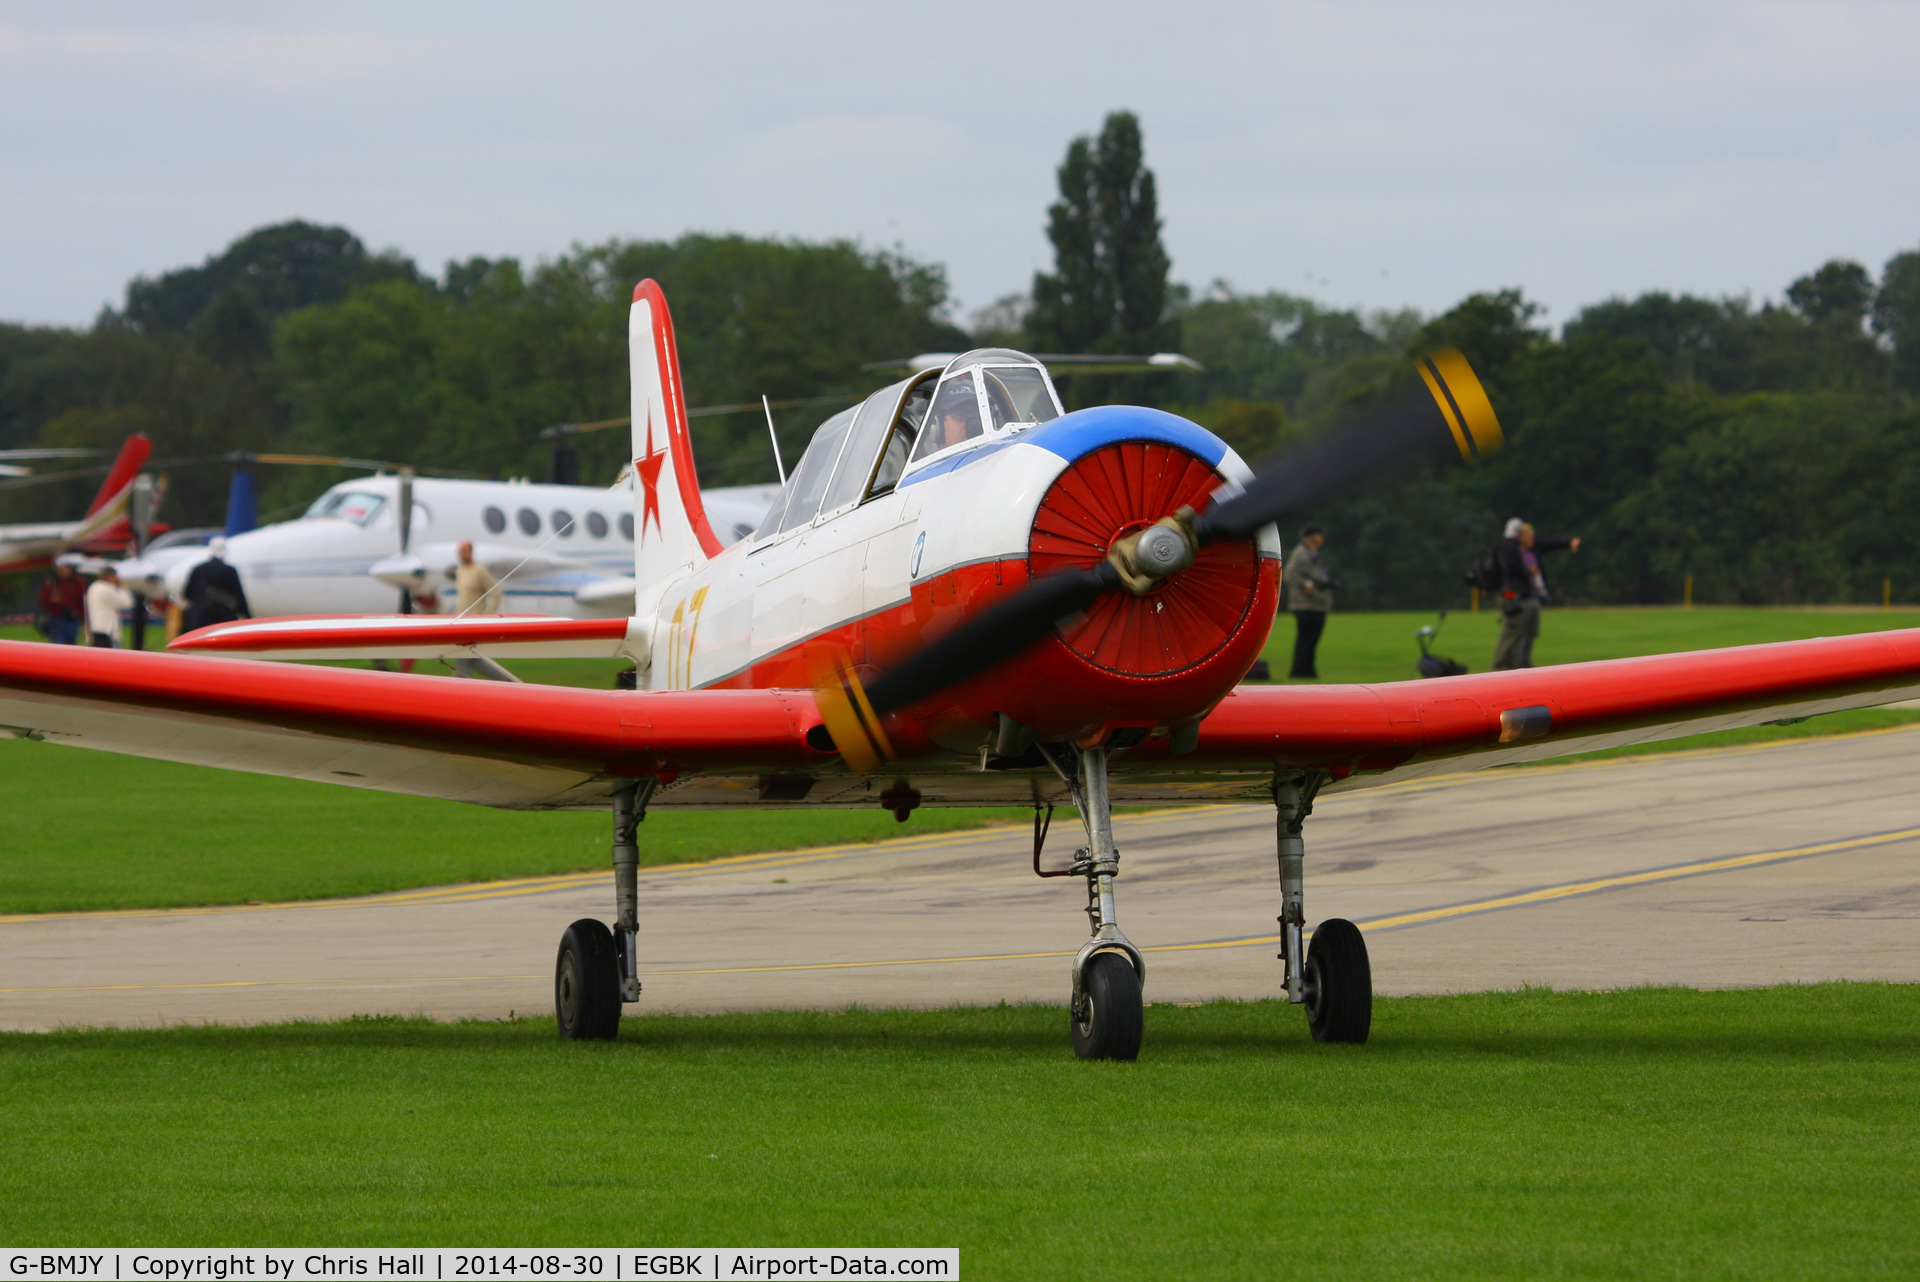 G-BMJY, 1964 Yakovlev Yak C-18A C/N 627, at the LAA Rally 2014, Sywell